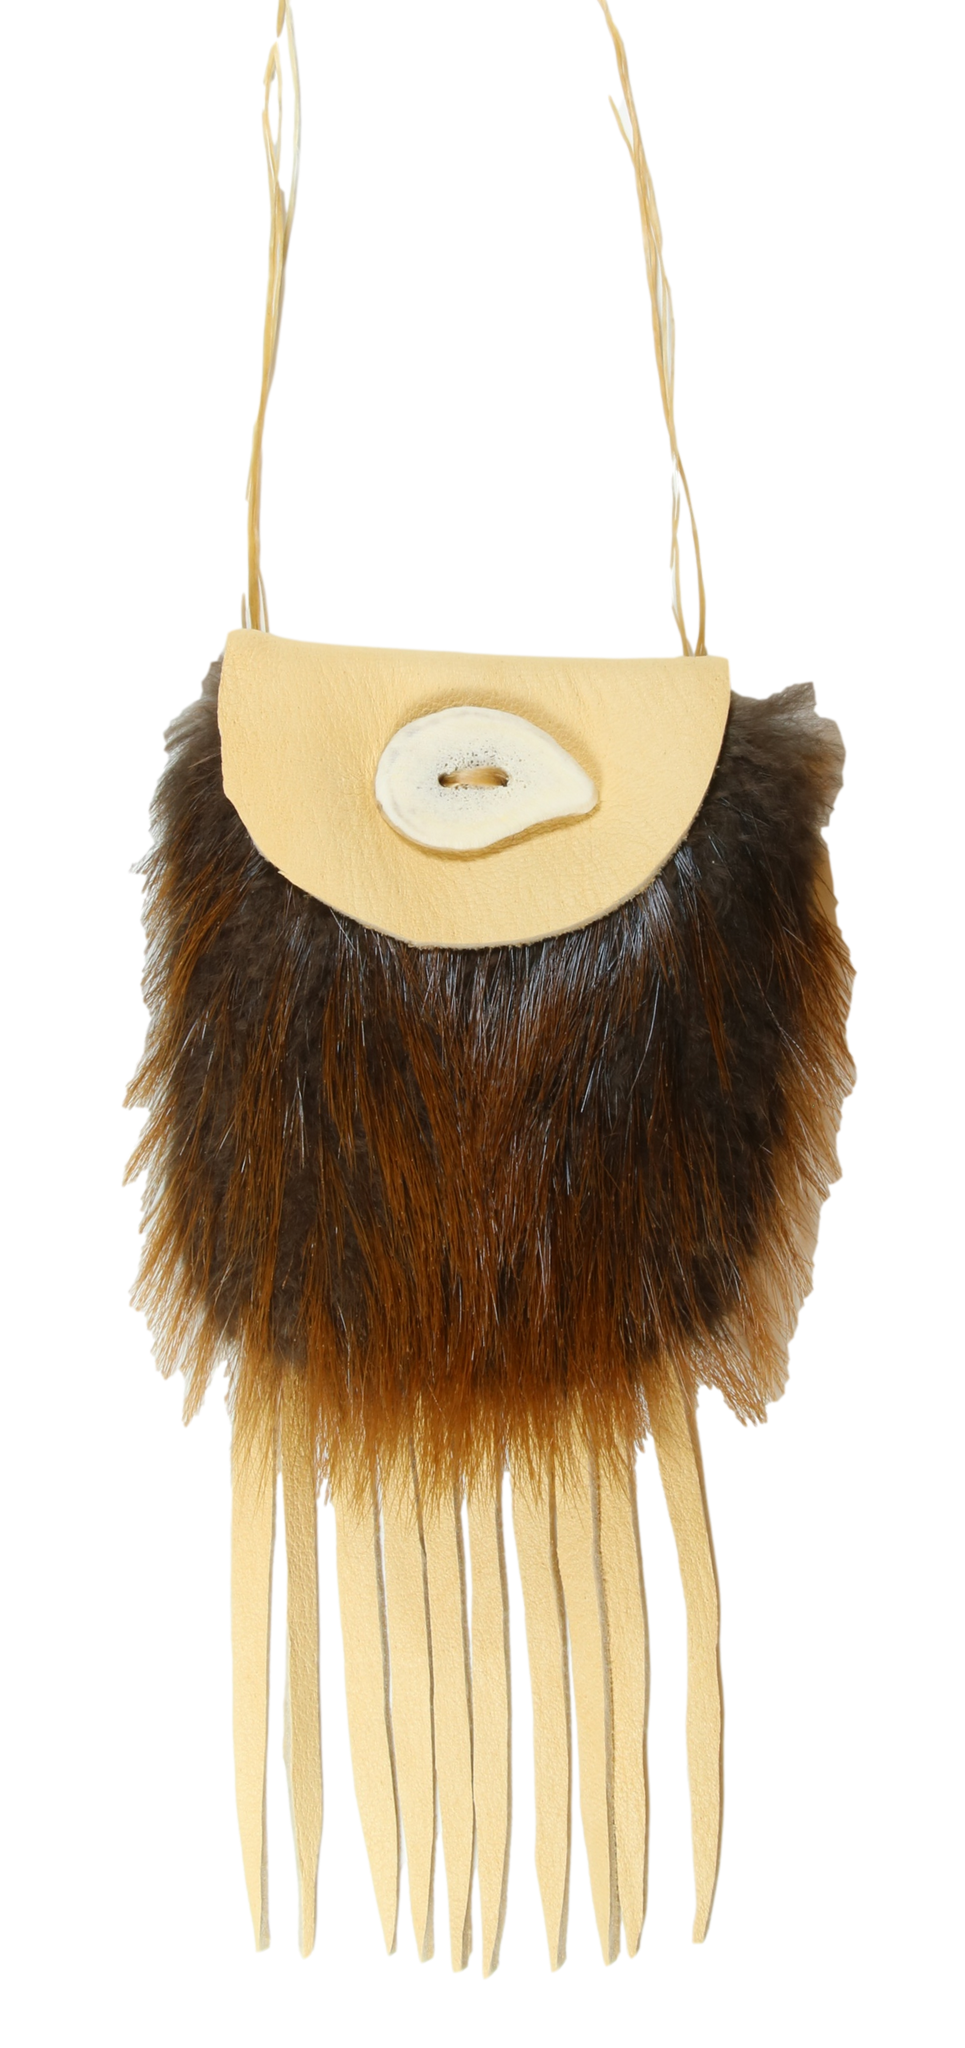 Medicine Bag Beaver with Commercially Tan Leather